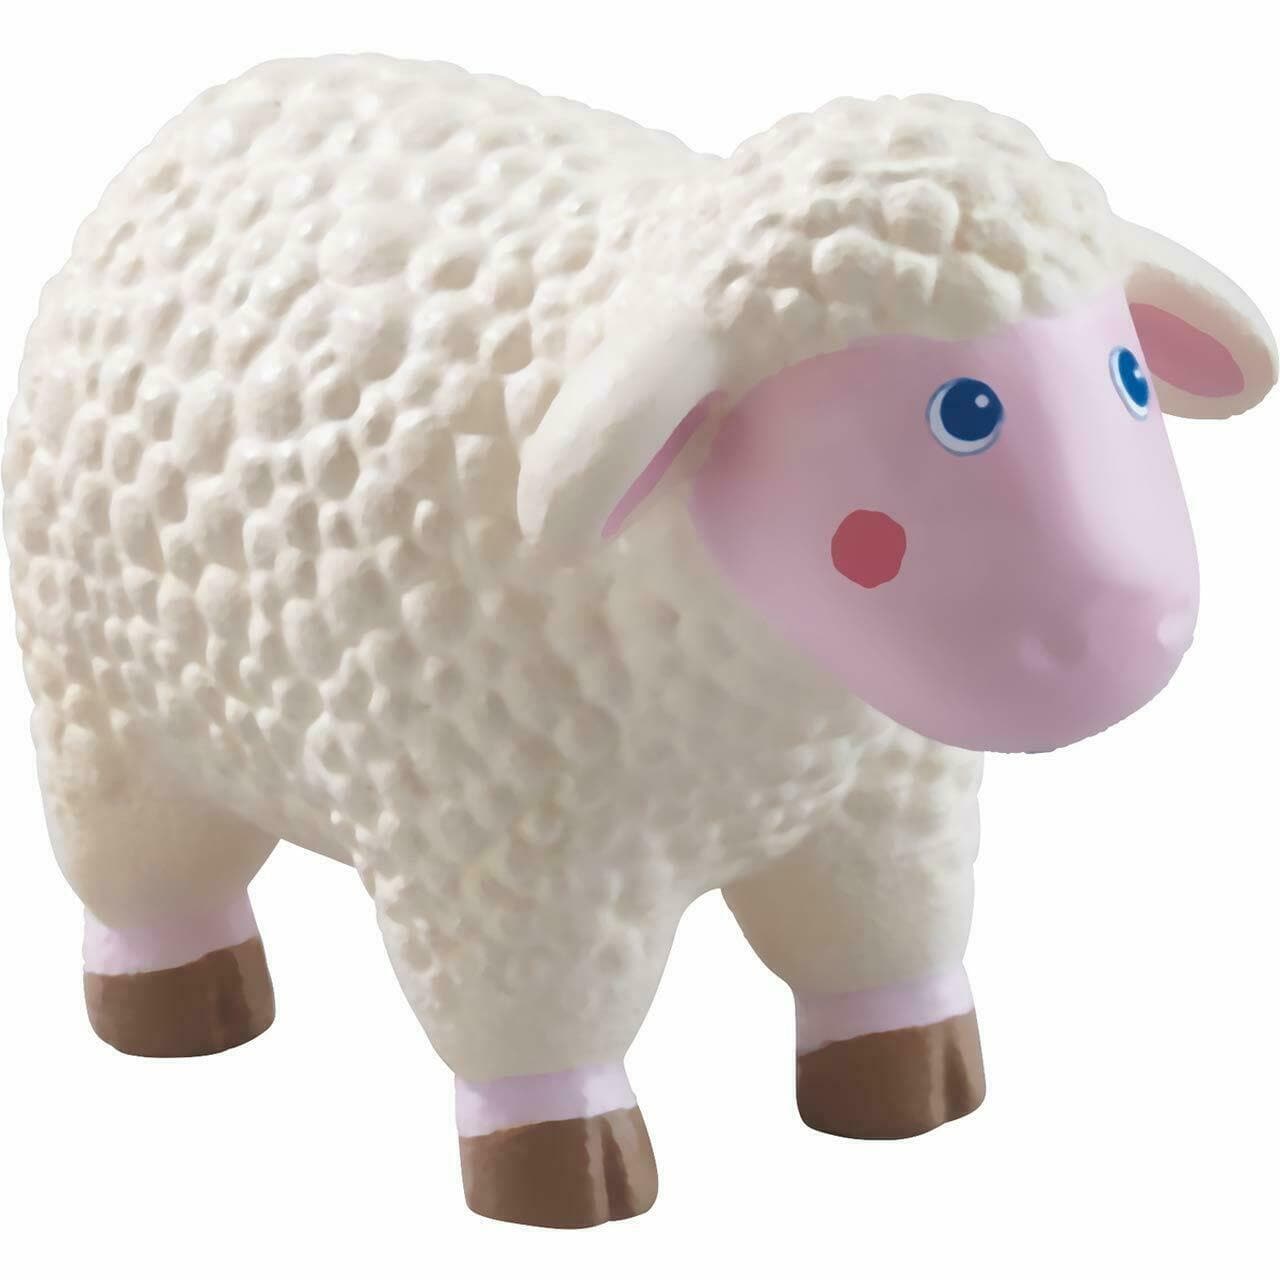 Haba-Little Friends Sheep-302984-Legacy Toys